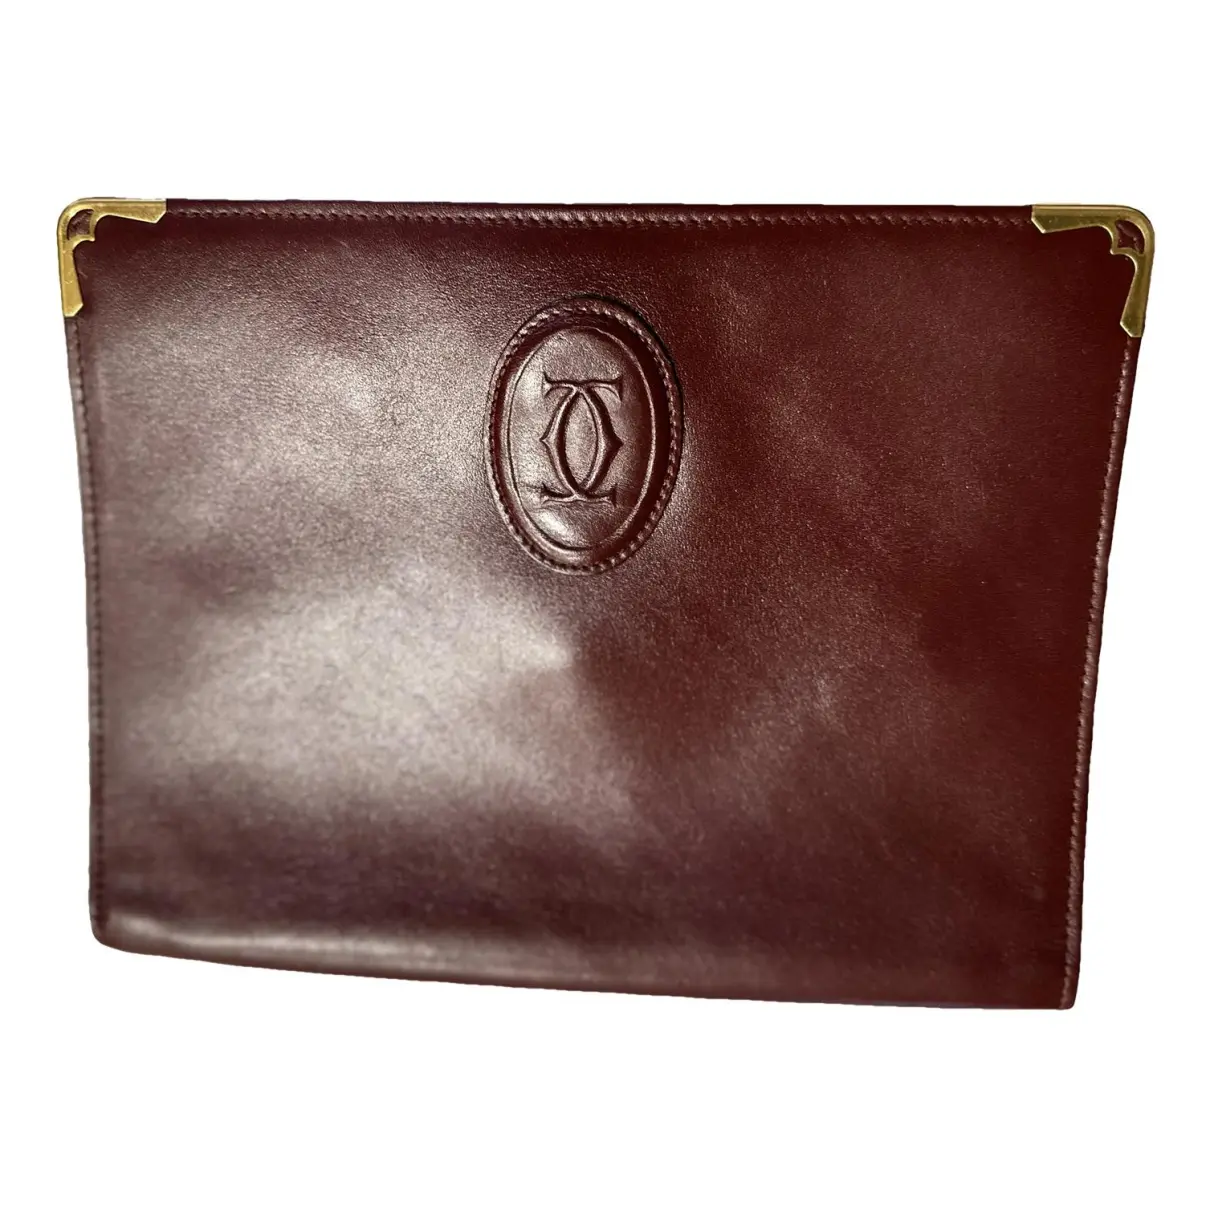 Marcello leather clutch bag